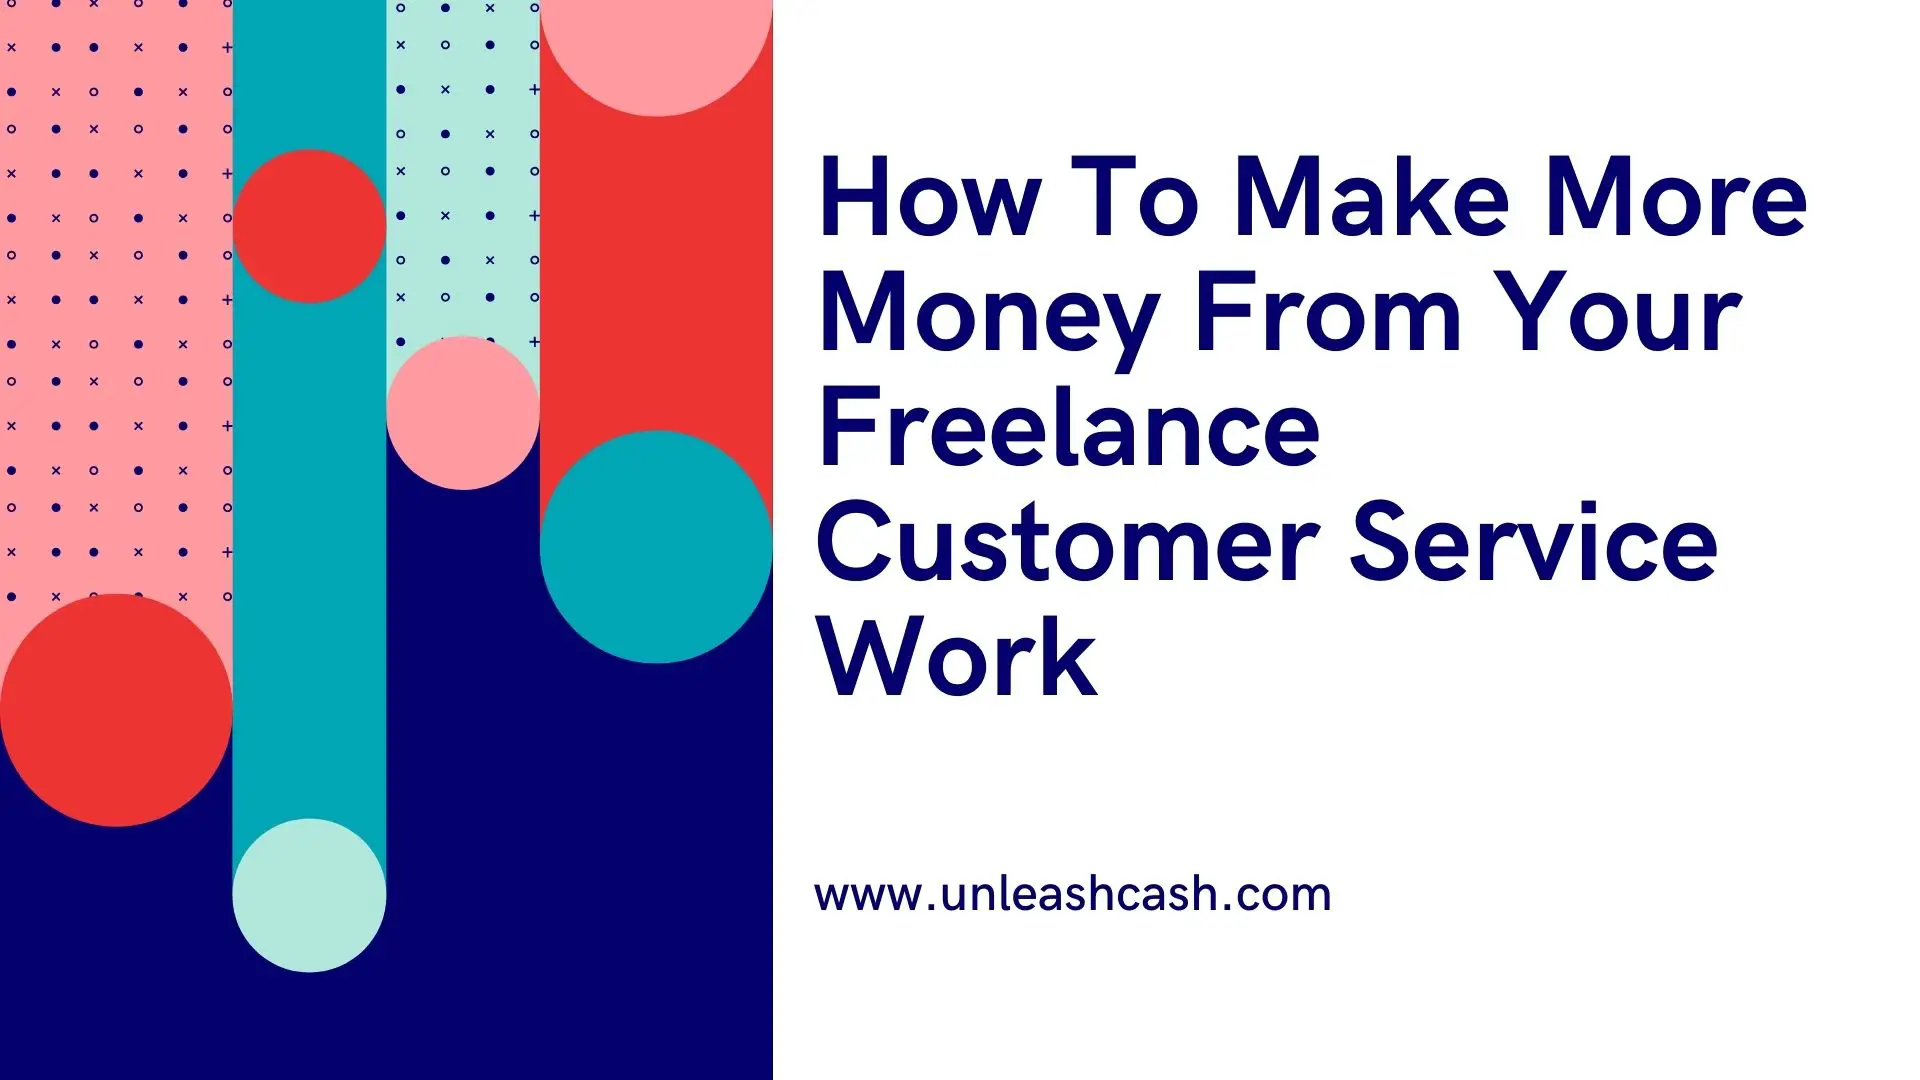 How To Make More Money From Your Freelance Customer Service Work